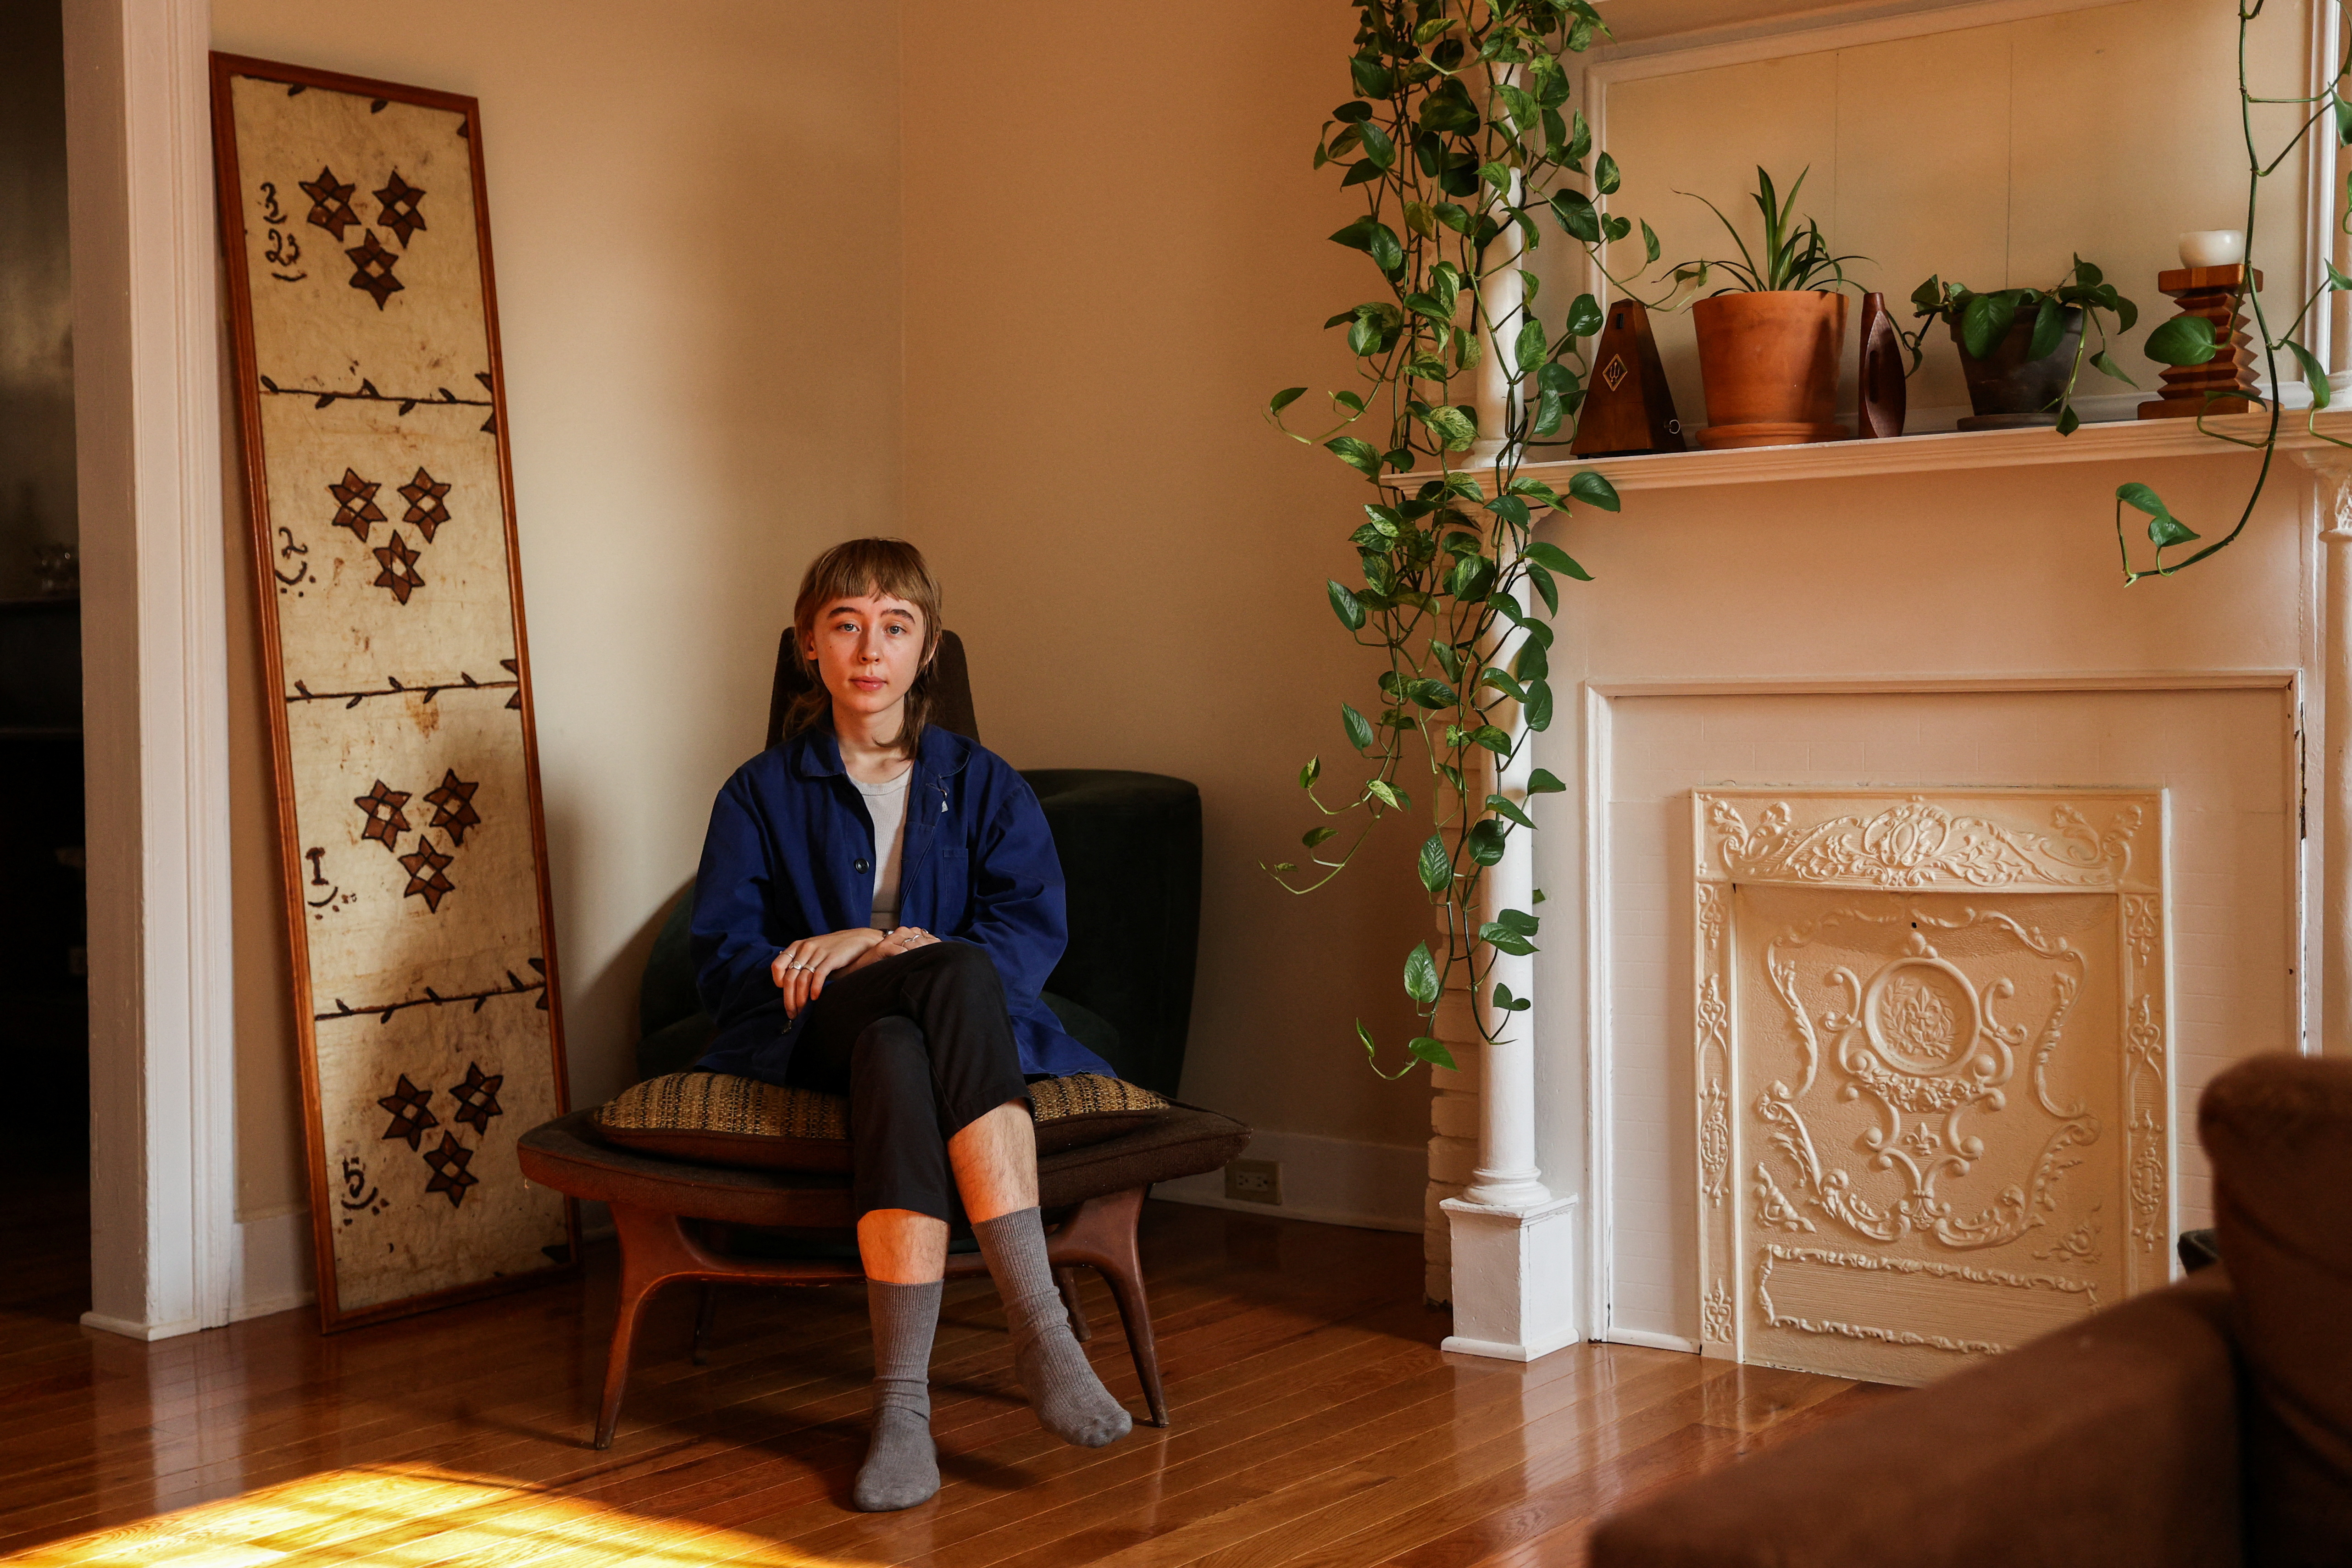 Maeve Kozlark poses for a portrait at their residence in New York